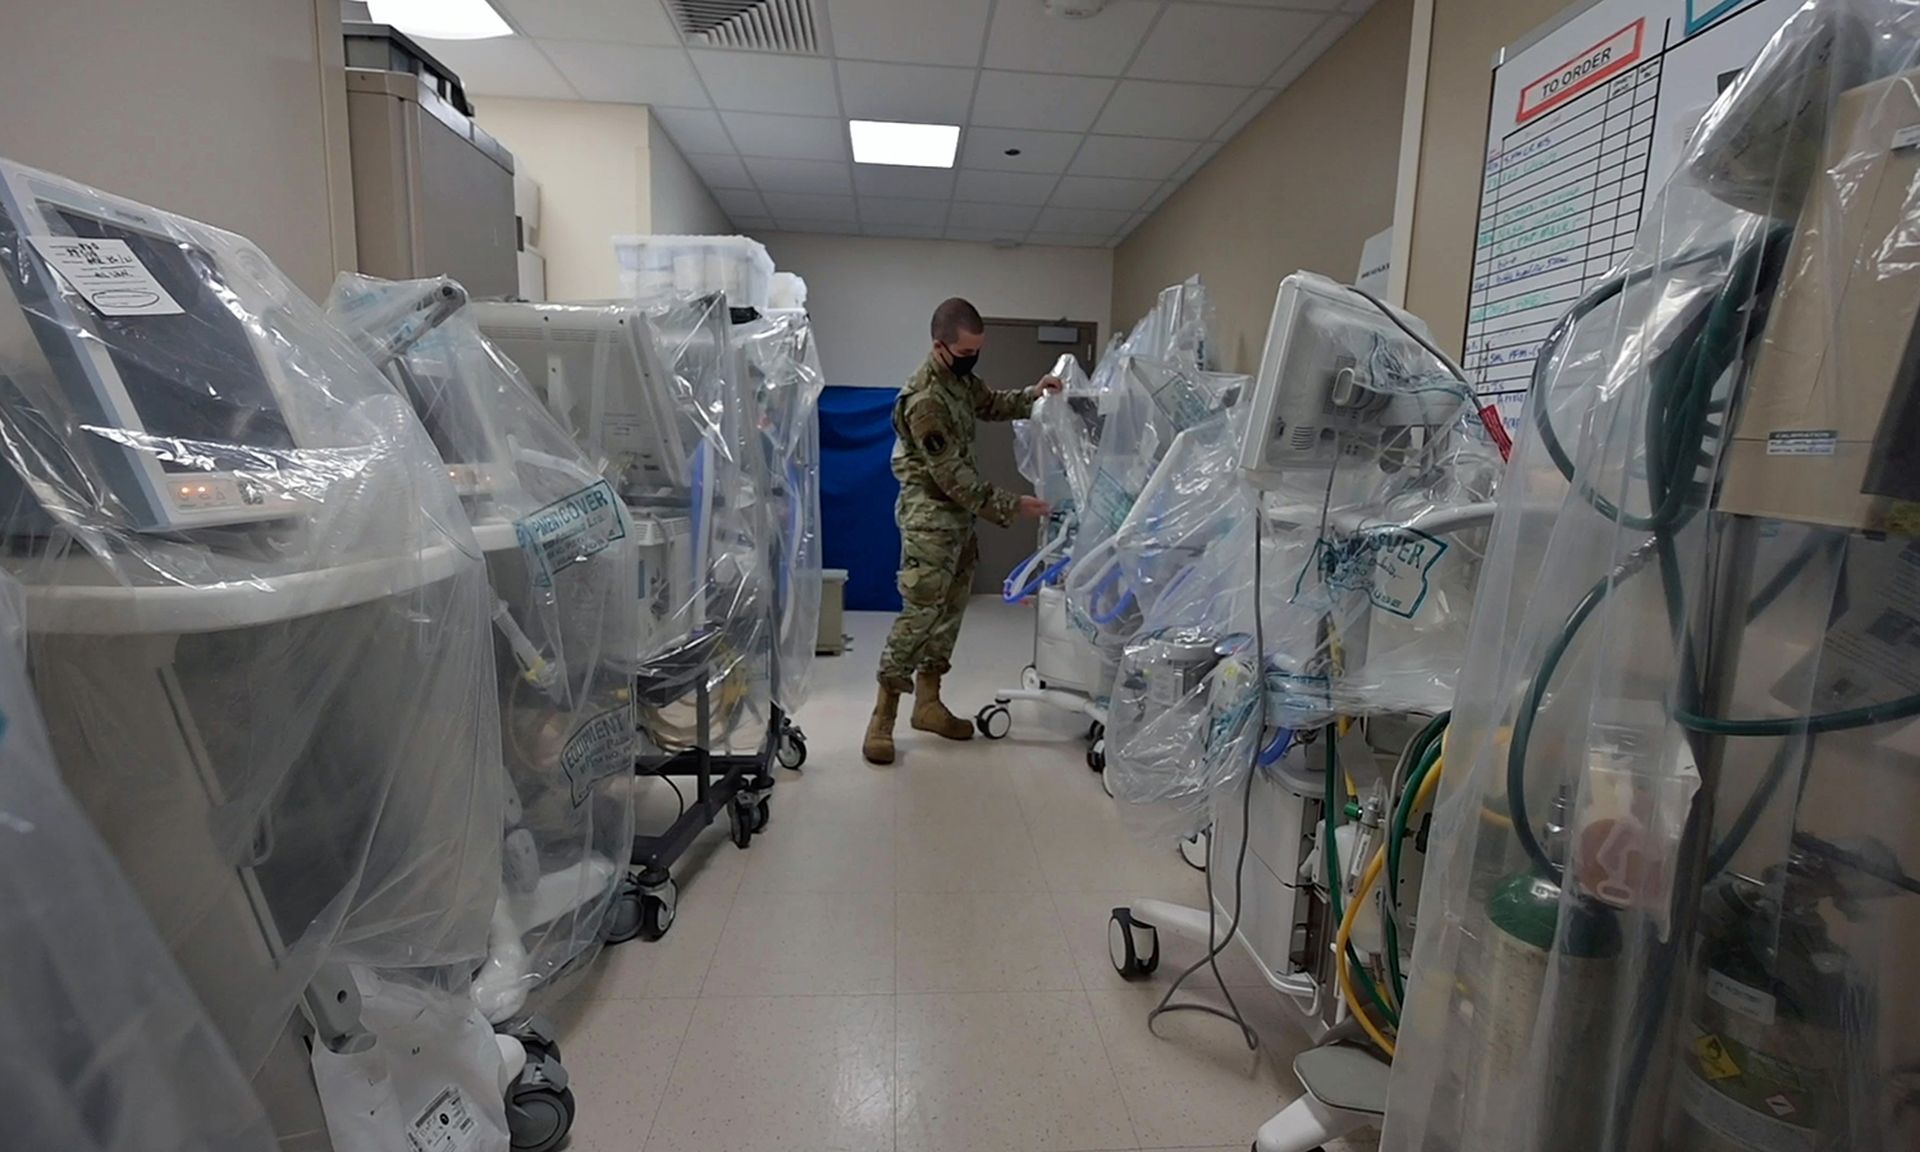 The Biden administration&#8217;s budget proposal includes improving the safety of medical devices. Pictured: A biomedical equipment technician stands in a room full of ventilators on May 17, 2021, at David Grant USAF Medical Center on Travis Air Force Base, Calif. (Nicholas Pilch/Air Force)